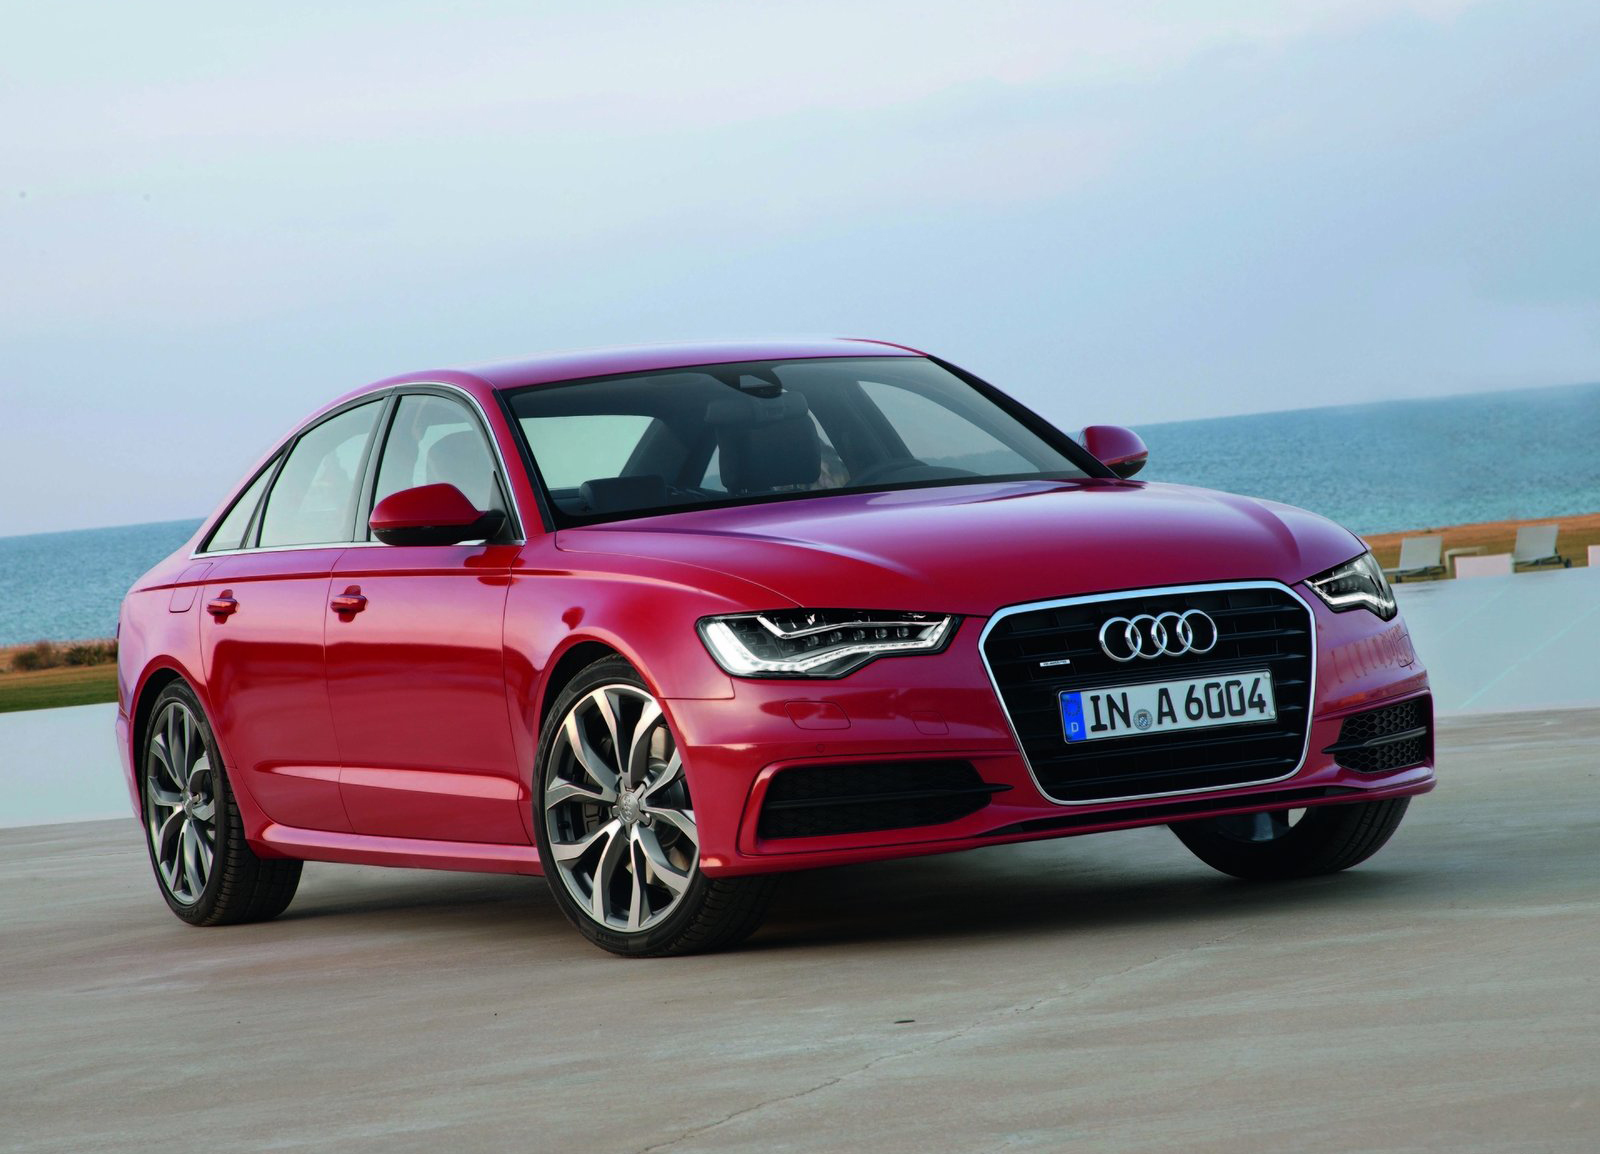 2012 Audi A6 Review and Specification | NewsAutomagz